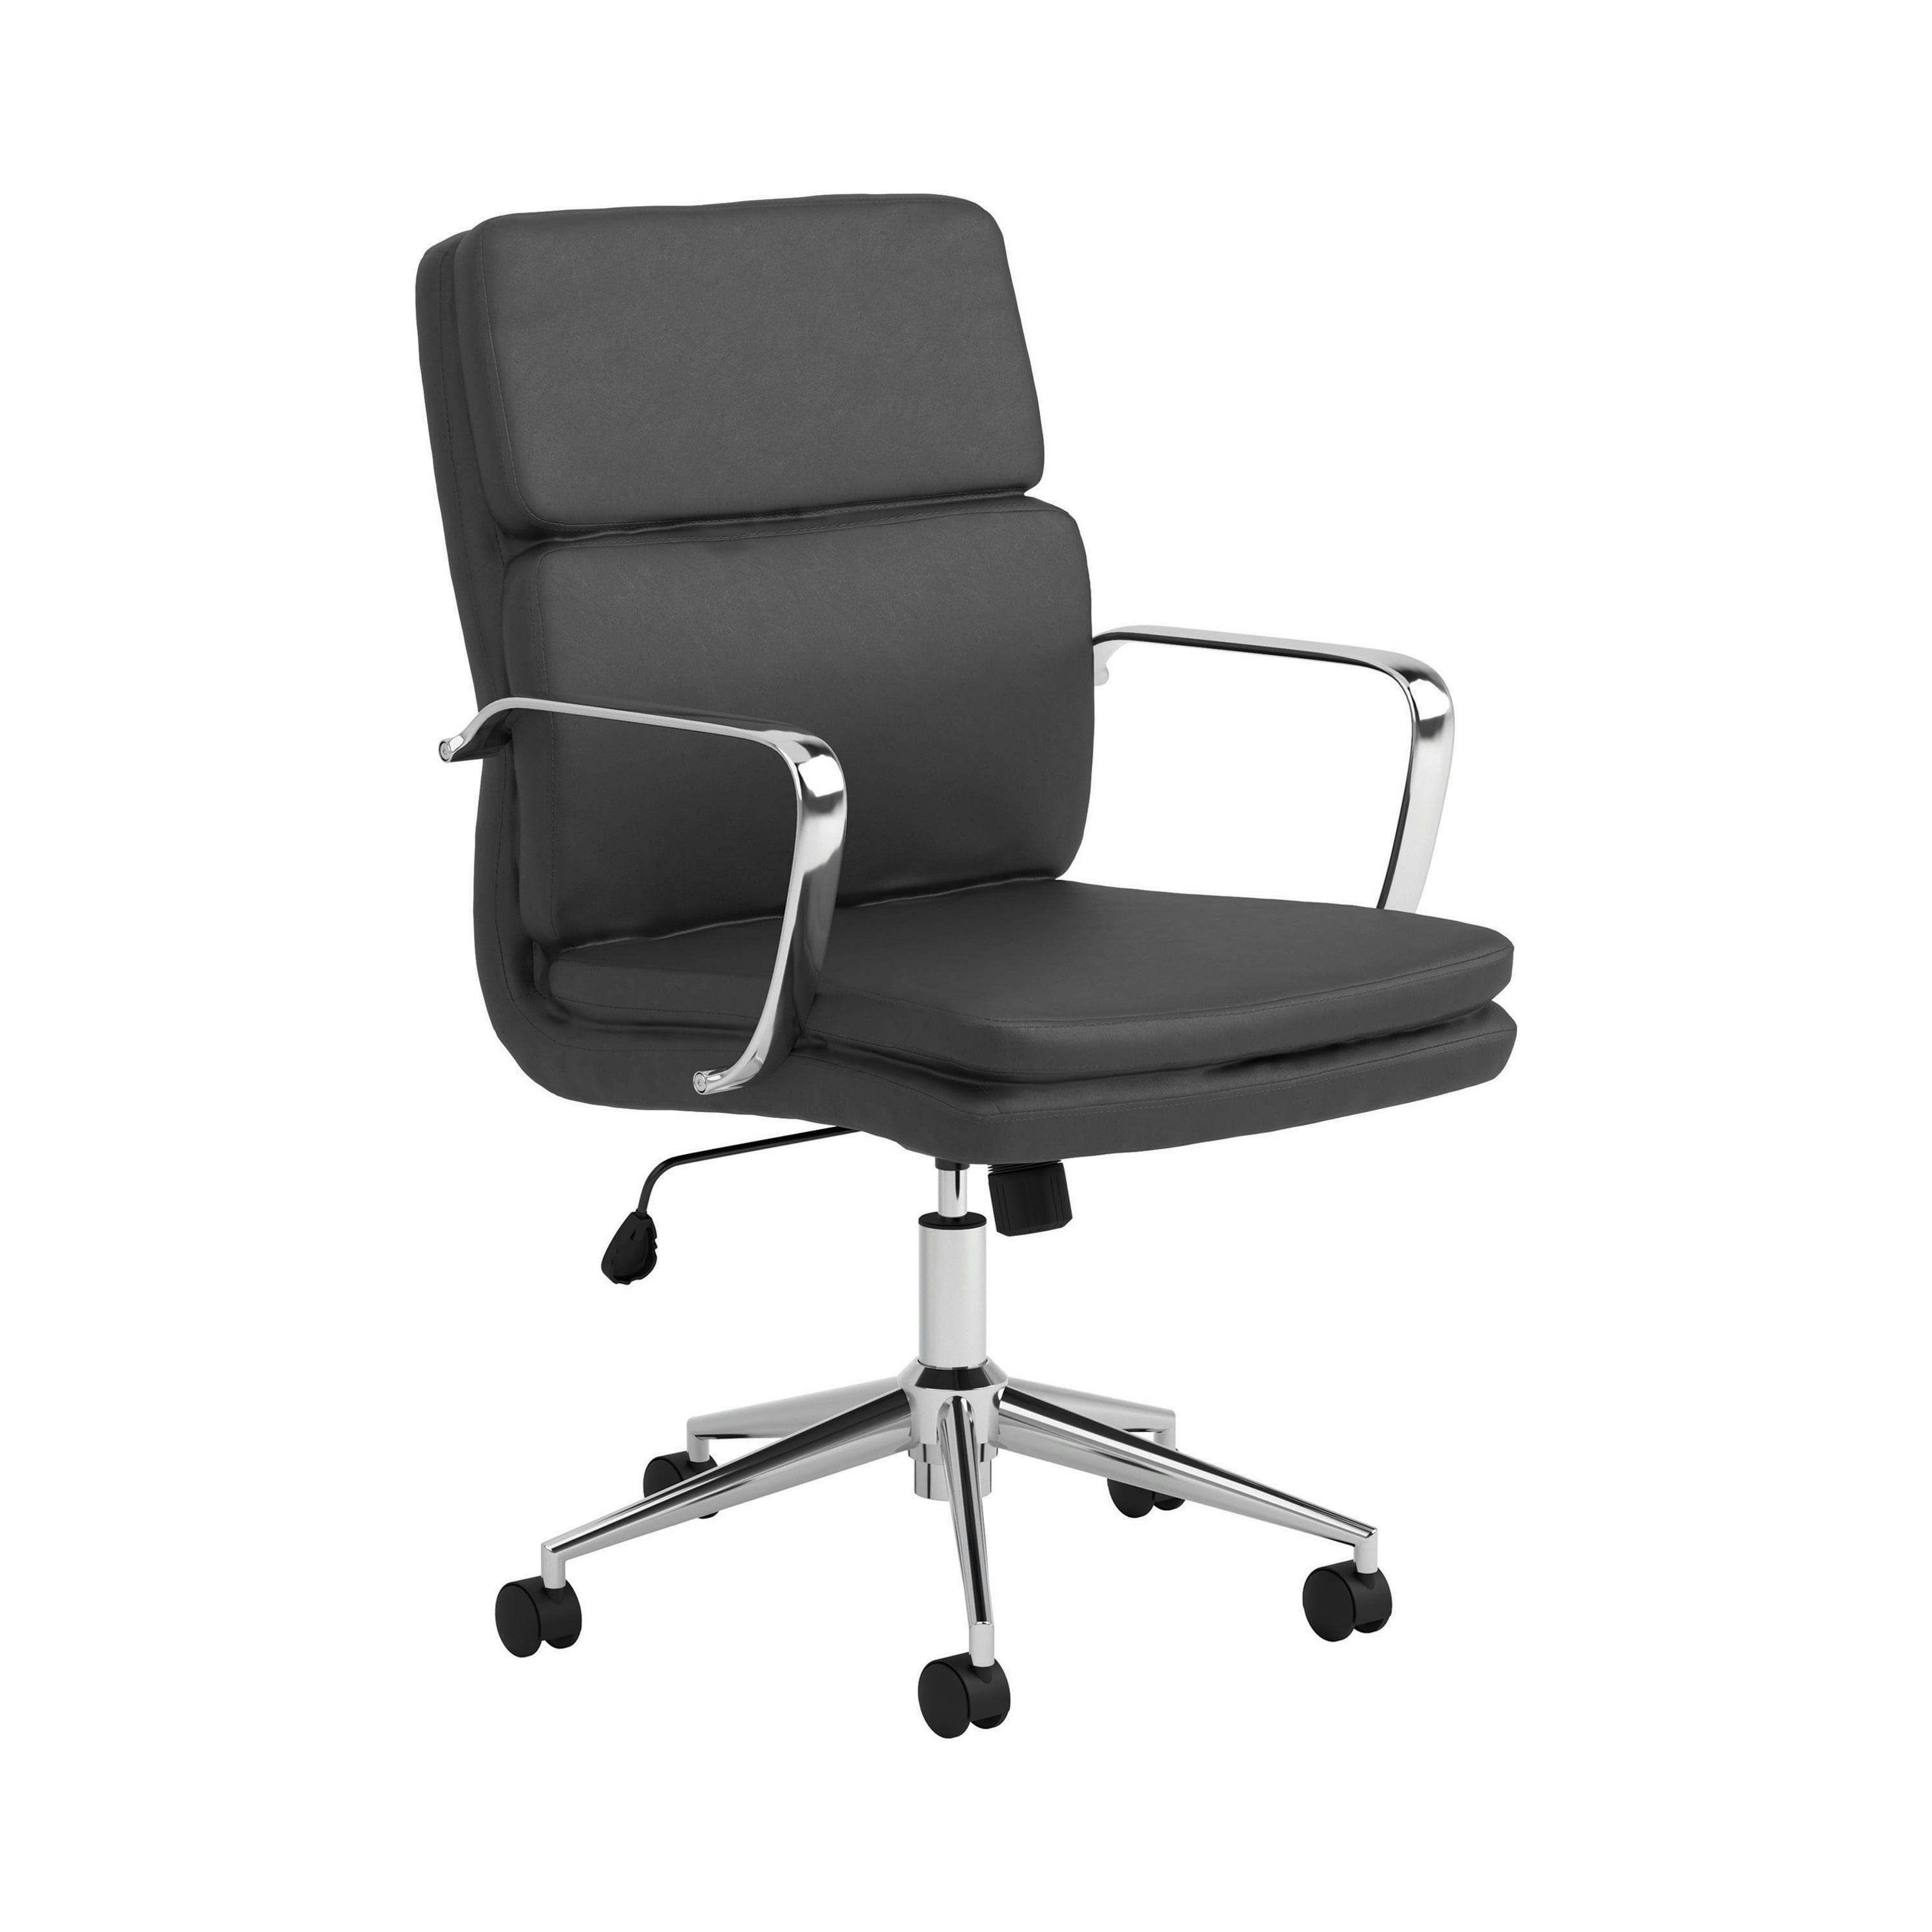 Ximena Transitional Black Leatherette and Chrome Desk Chair